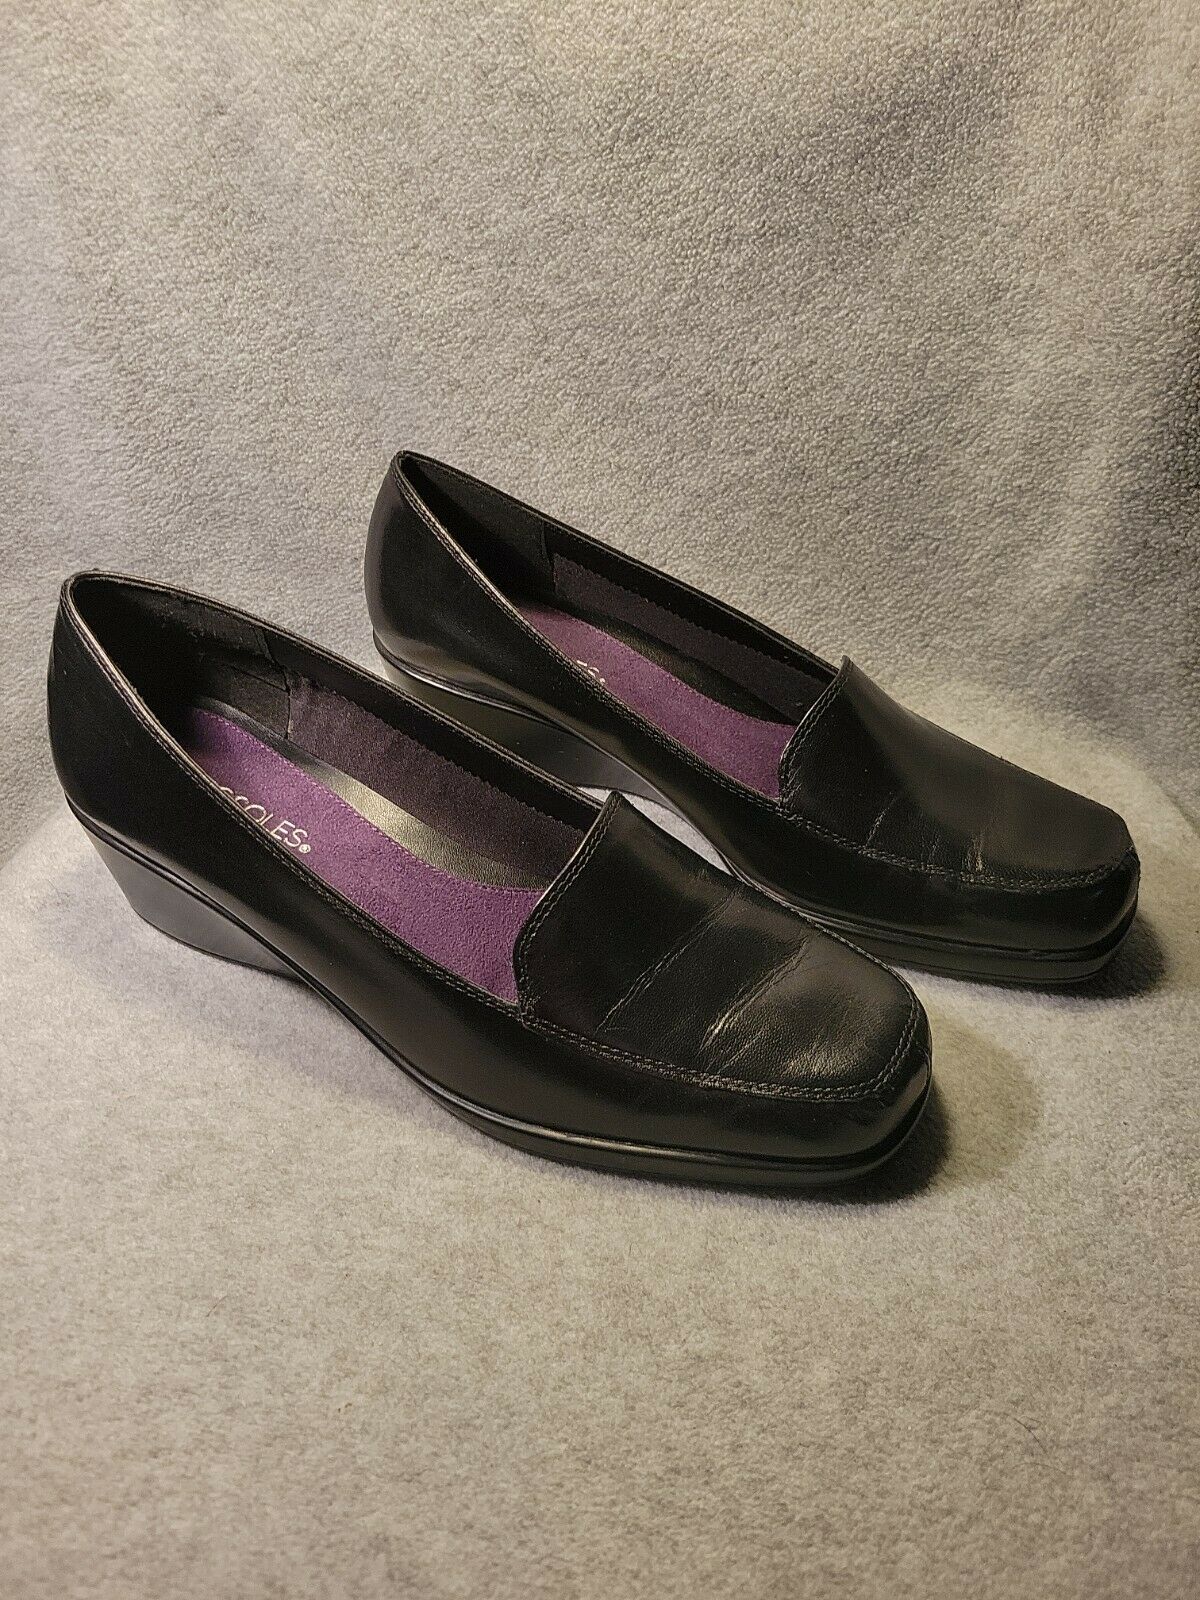 AEROSOLES Final Exam 9.5M Black Smooth Leather Wedge Heels Loafer Shoes. NWB